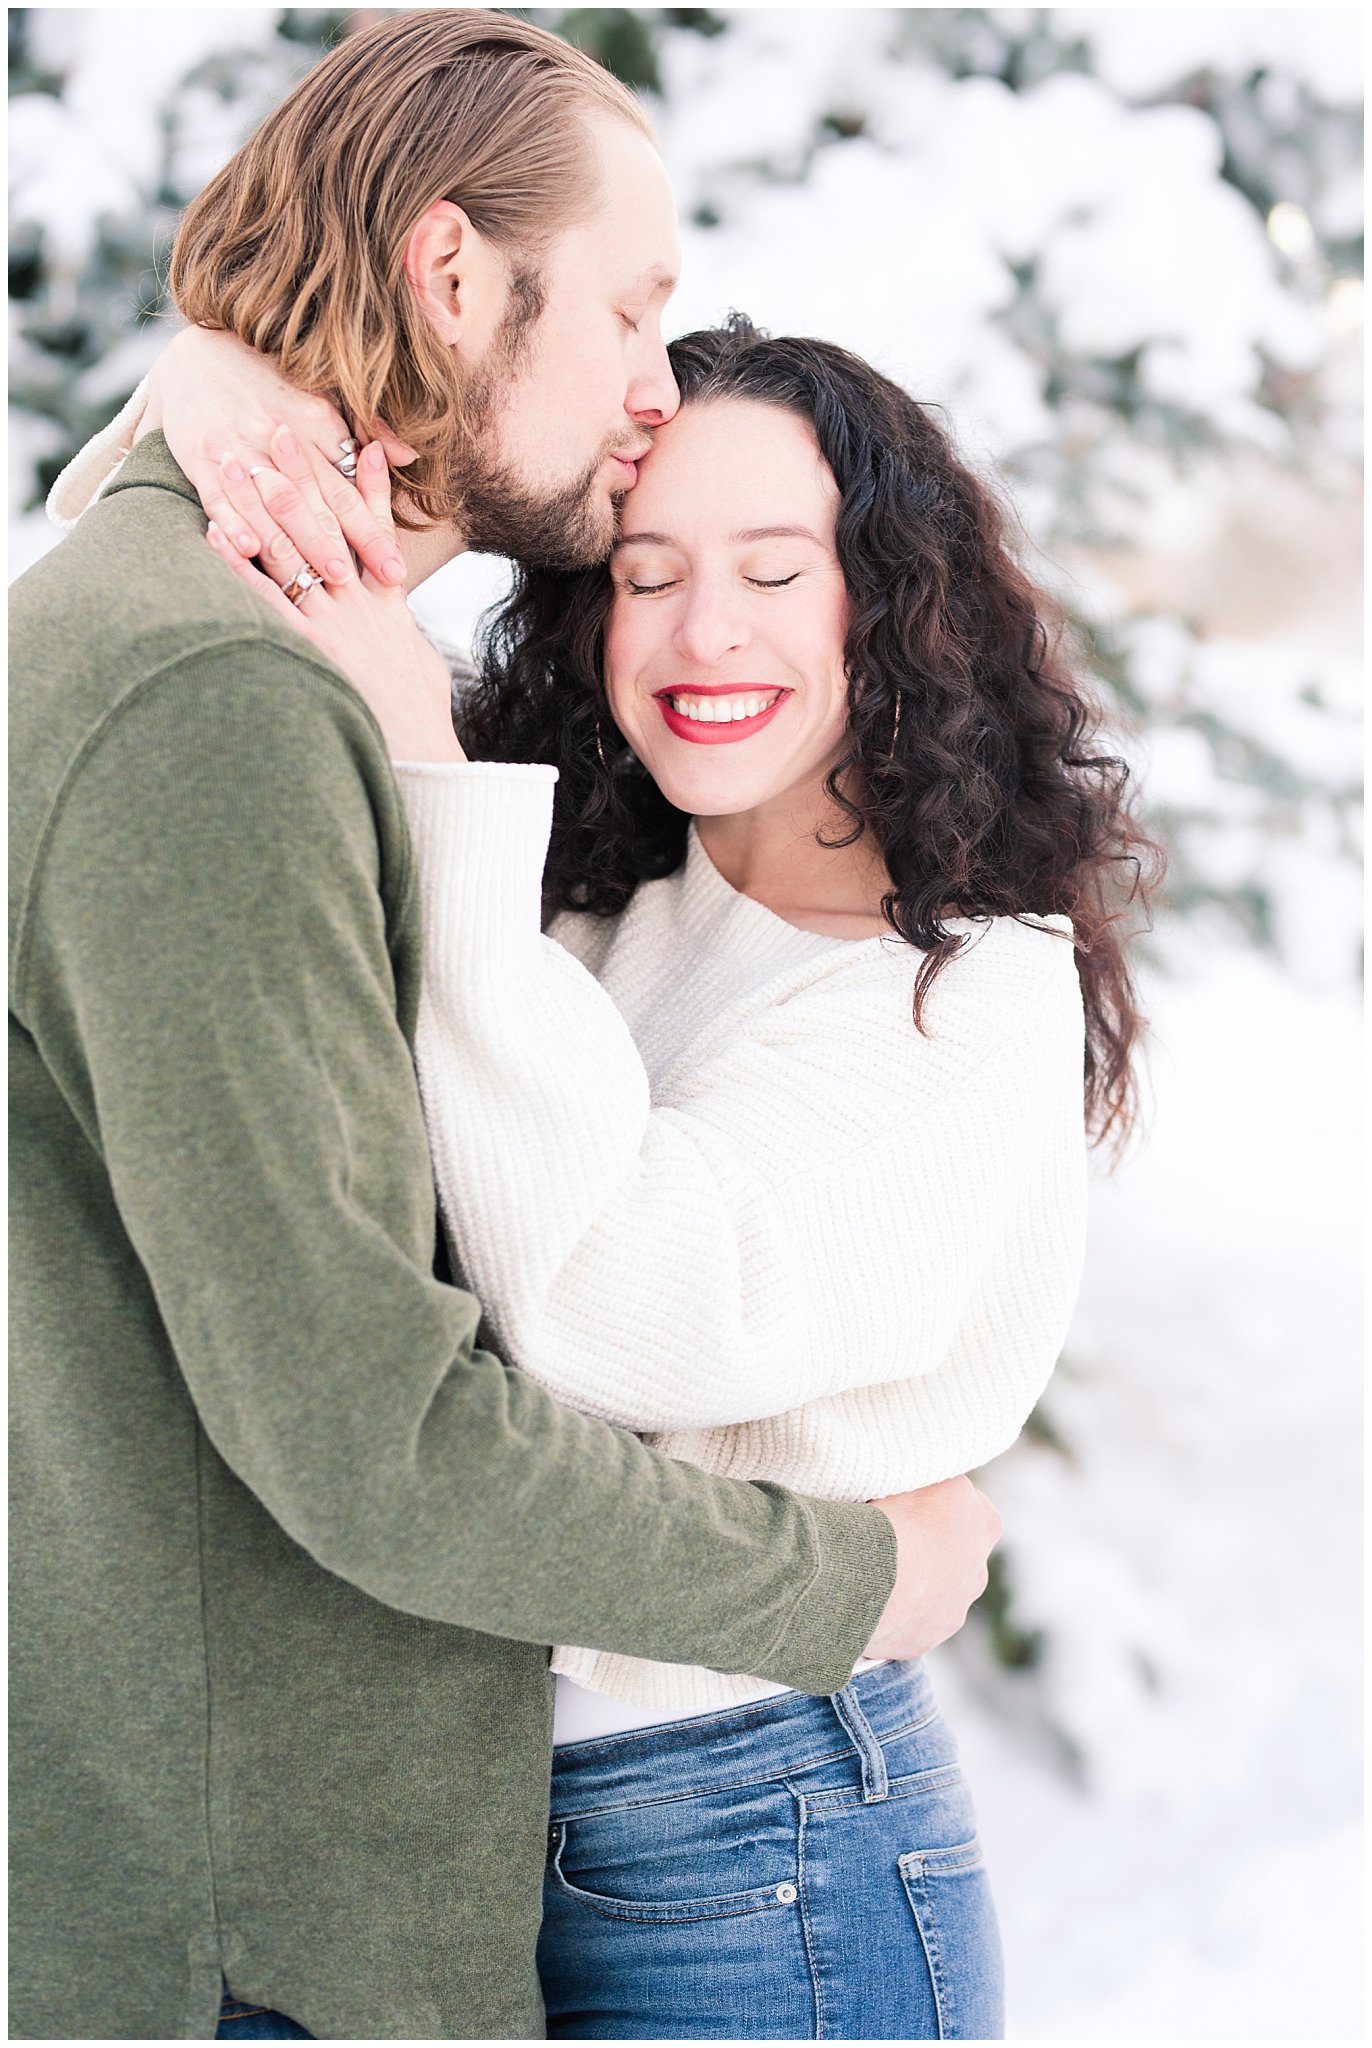 Couple in the Utah mountains during the winter with snowy pine trees | Top Utah Wedding and Couples Photos 2019 | Jessie and Dallin Photography